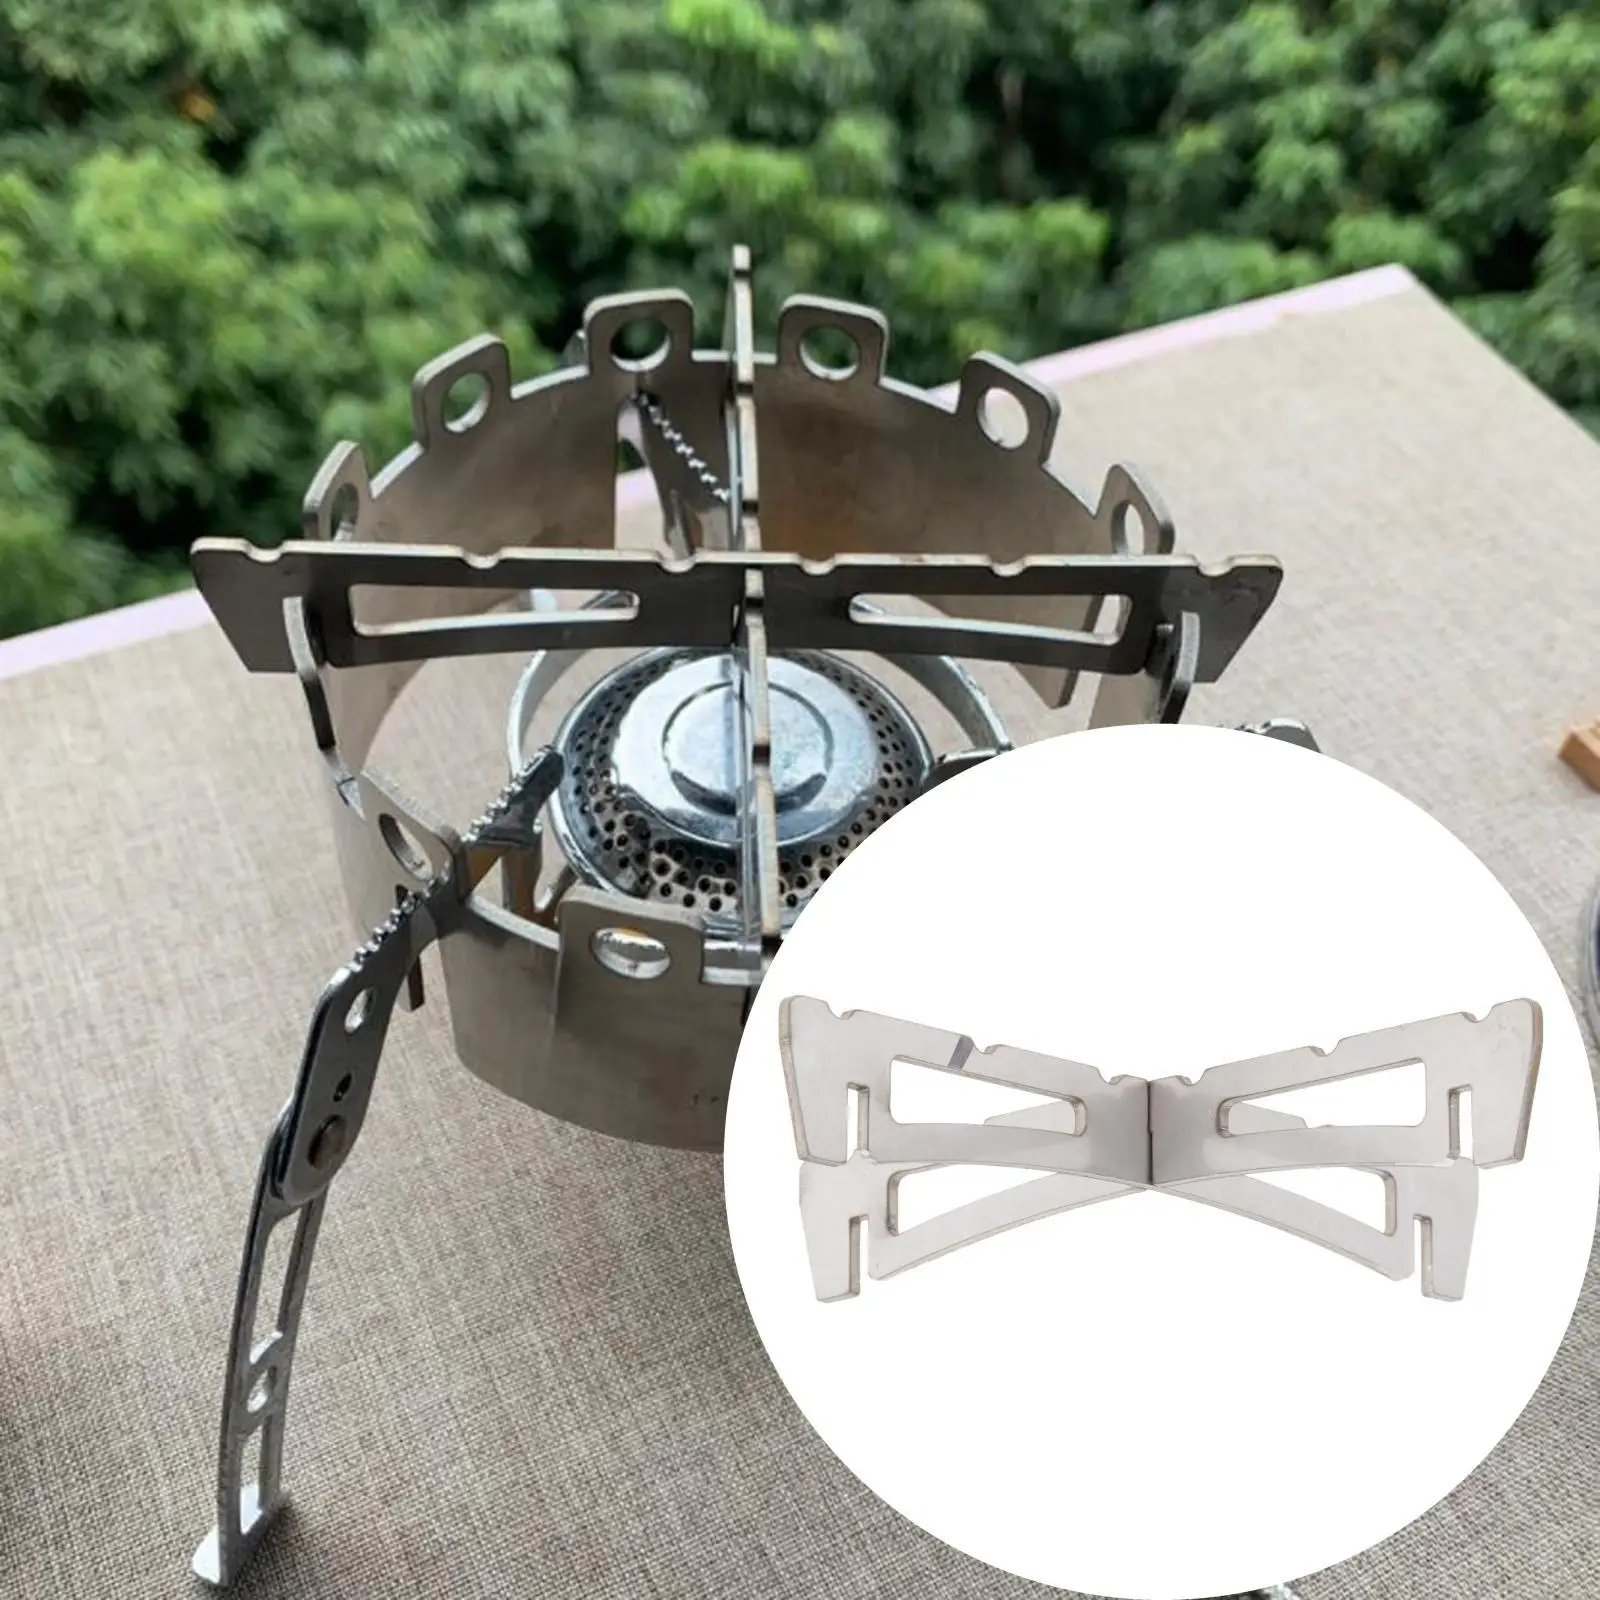 Mini Alcohol Stove Cross Stand Foldable Rack Ultralight 304 Burner Stand Stove Shelf for Camping Outdoor Hiking BBQ Picnic